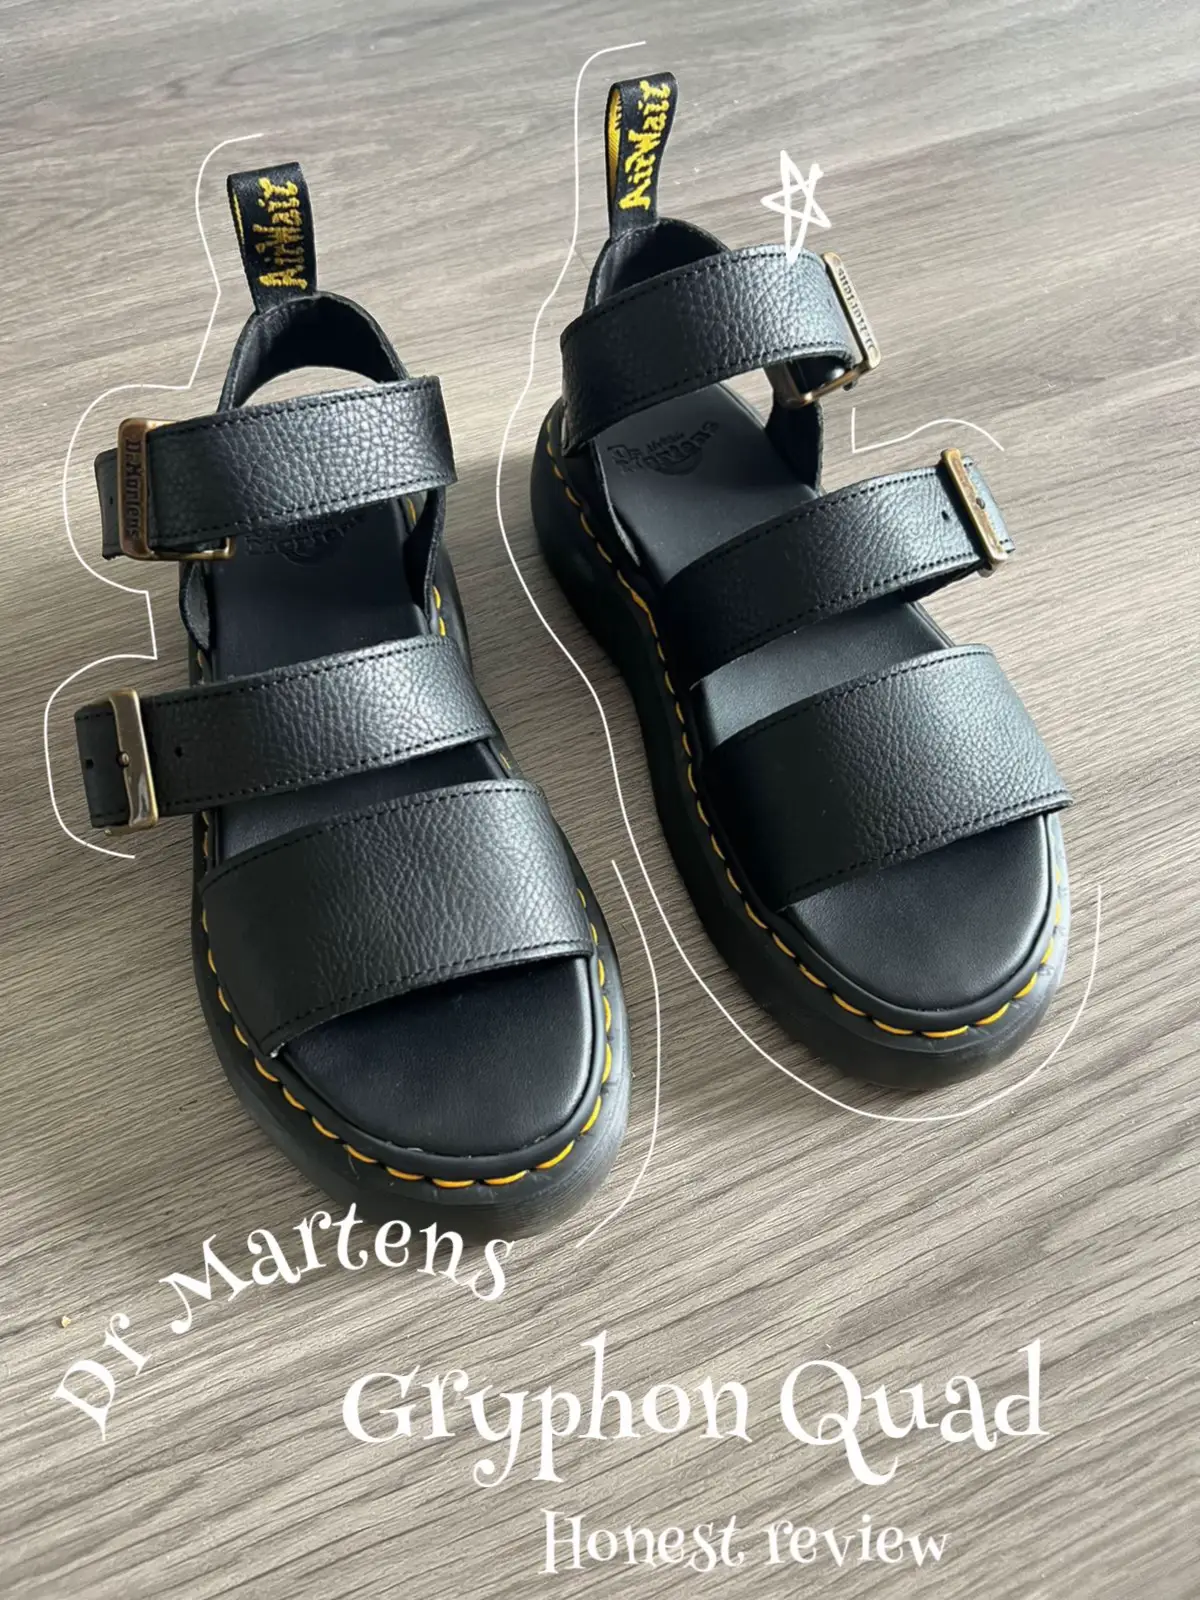 Dr Martens Gryphon Quads honest review   Gallery posted by